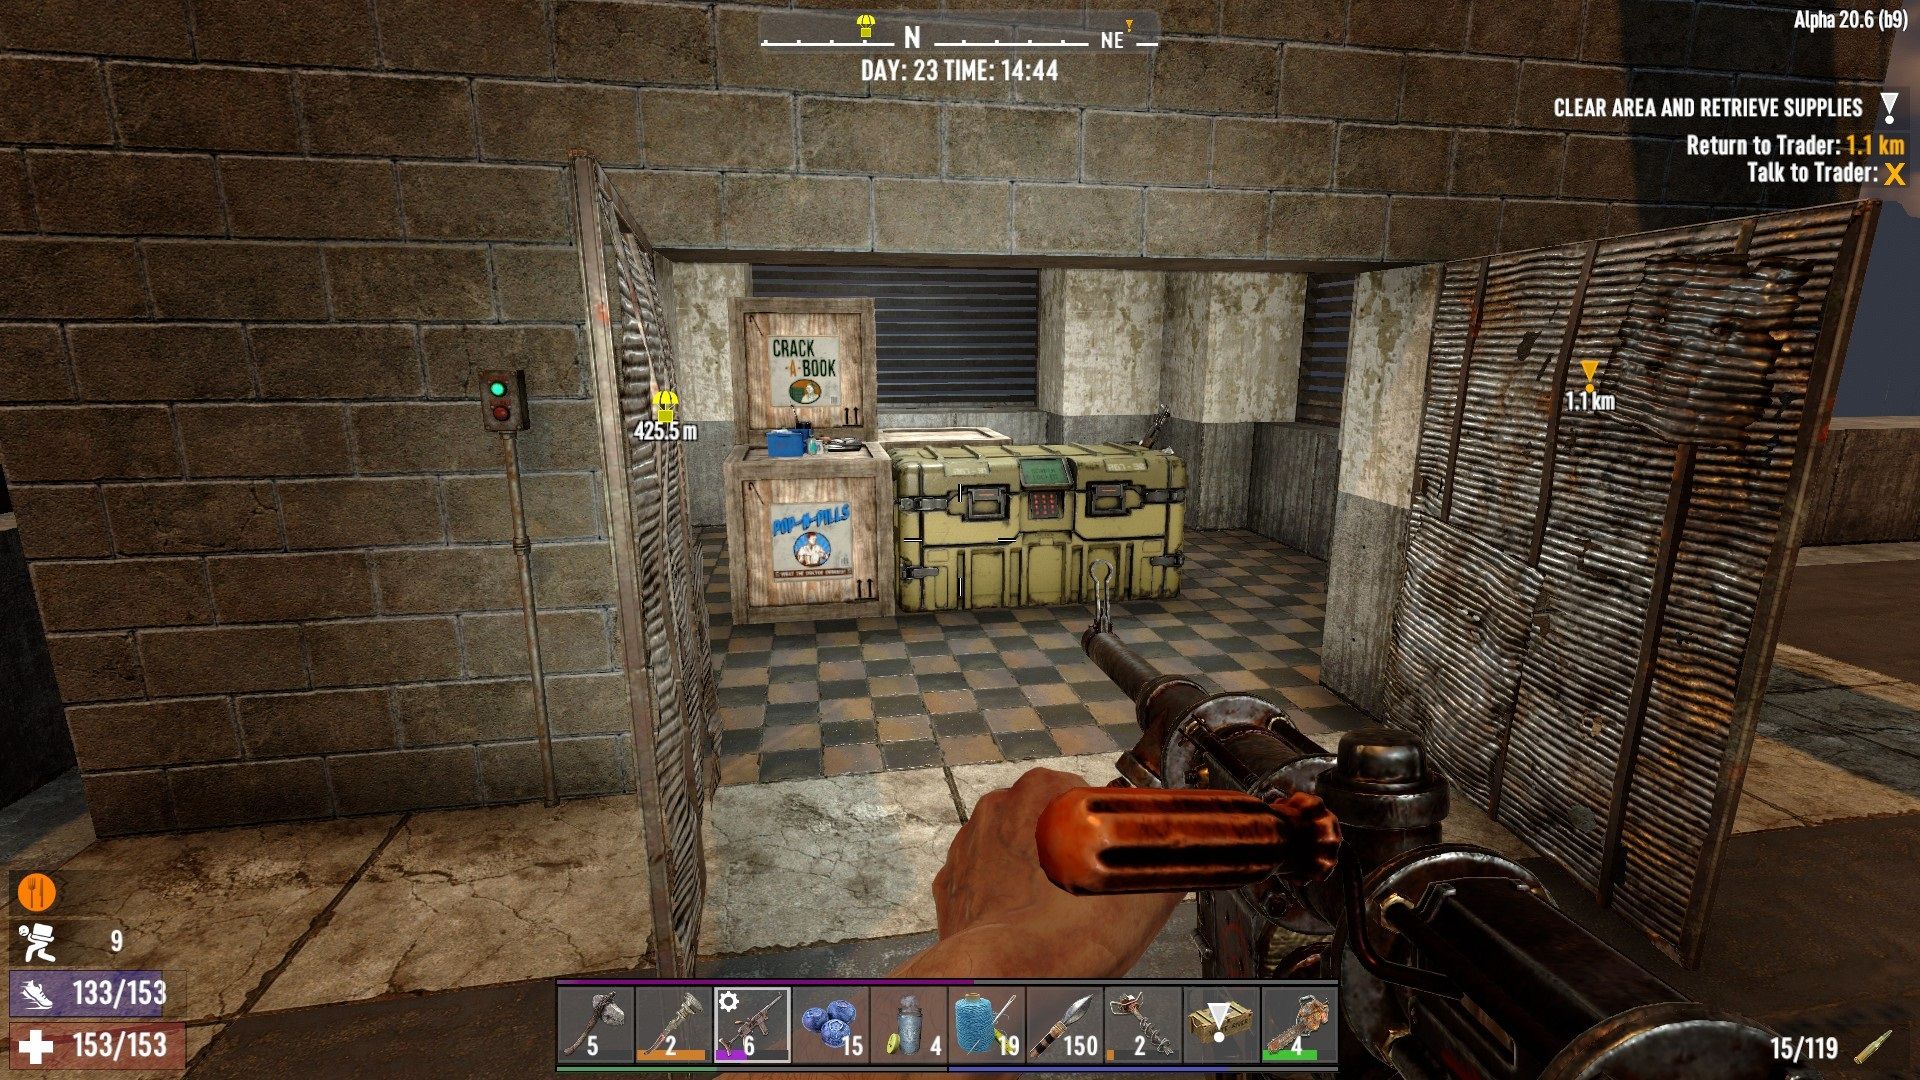 finding the main loot room Apartment Building 249 7 Days To Die.jpg